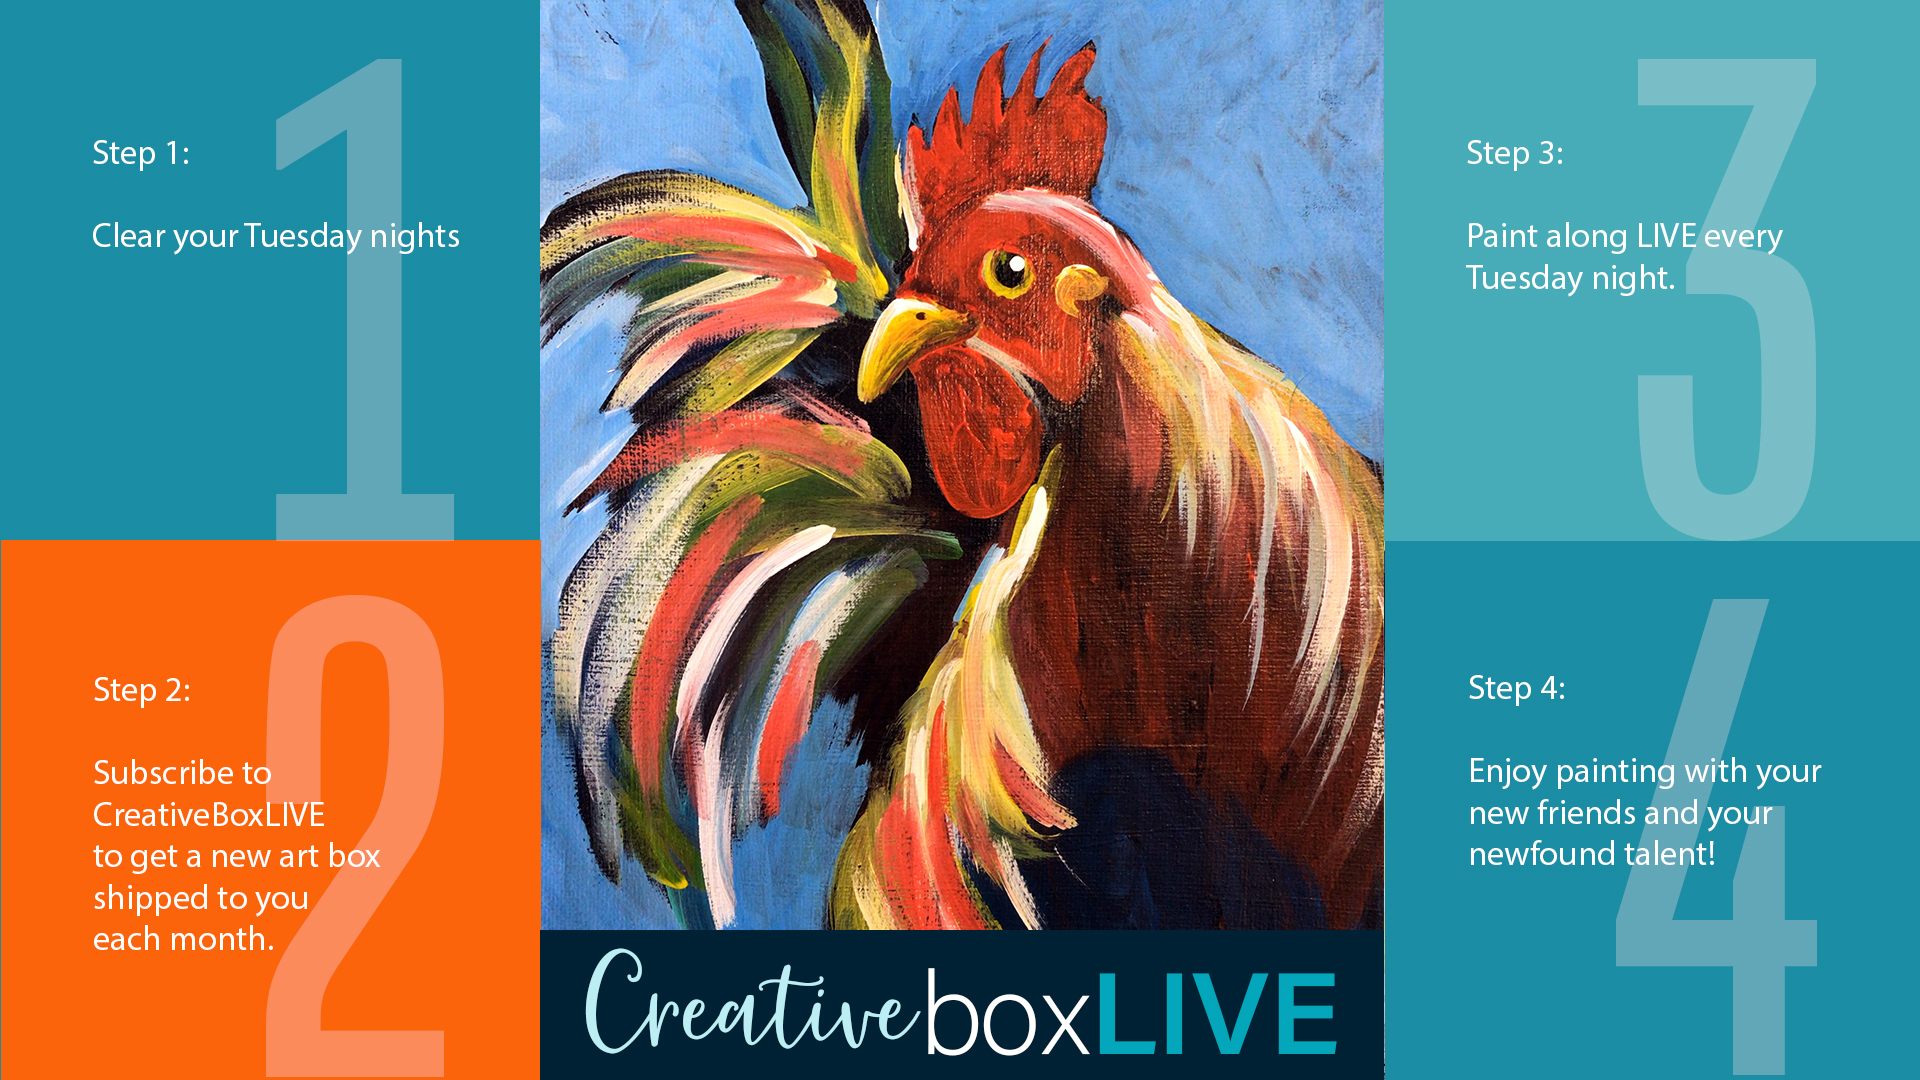 Rooster CBL with CreativeBoxLIVE from Creatively Uncorked http://creativelyuncorked.com/